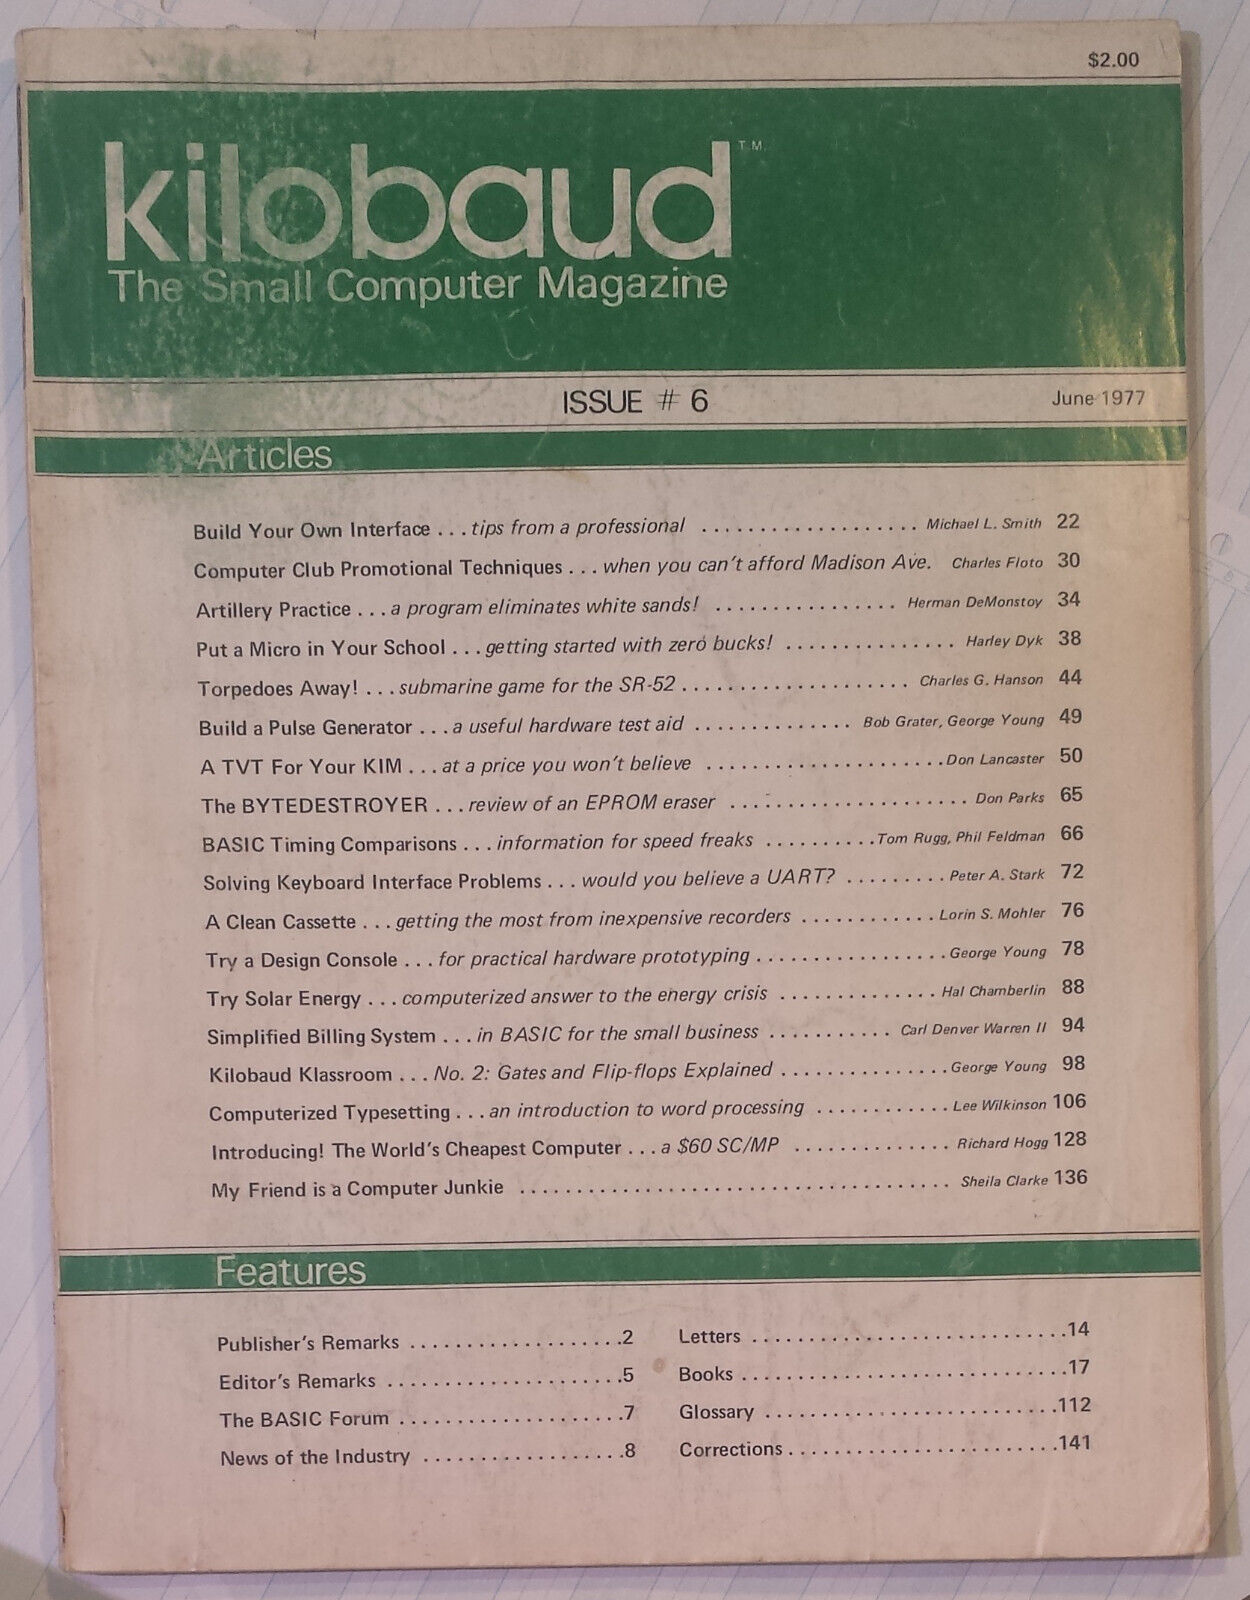 Vintage kilobaud The Small Computer Magazine Issue 6 June 1977 45 years old